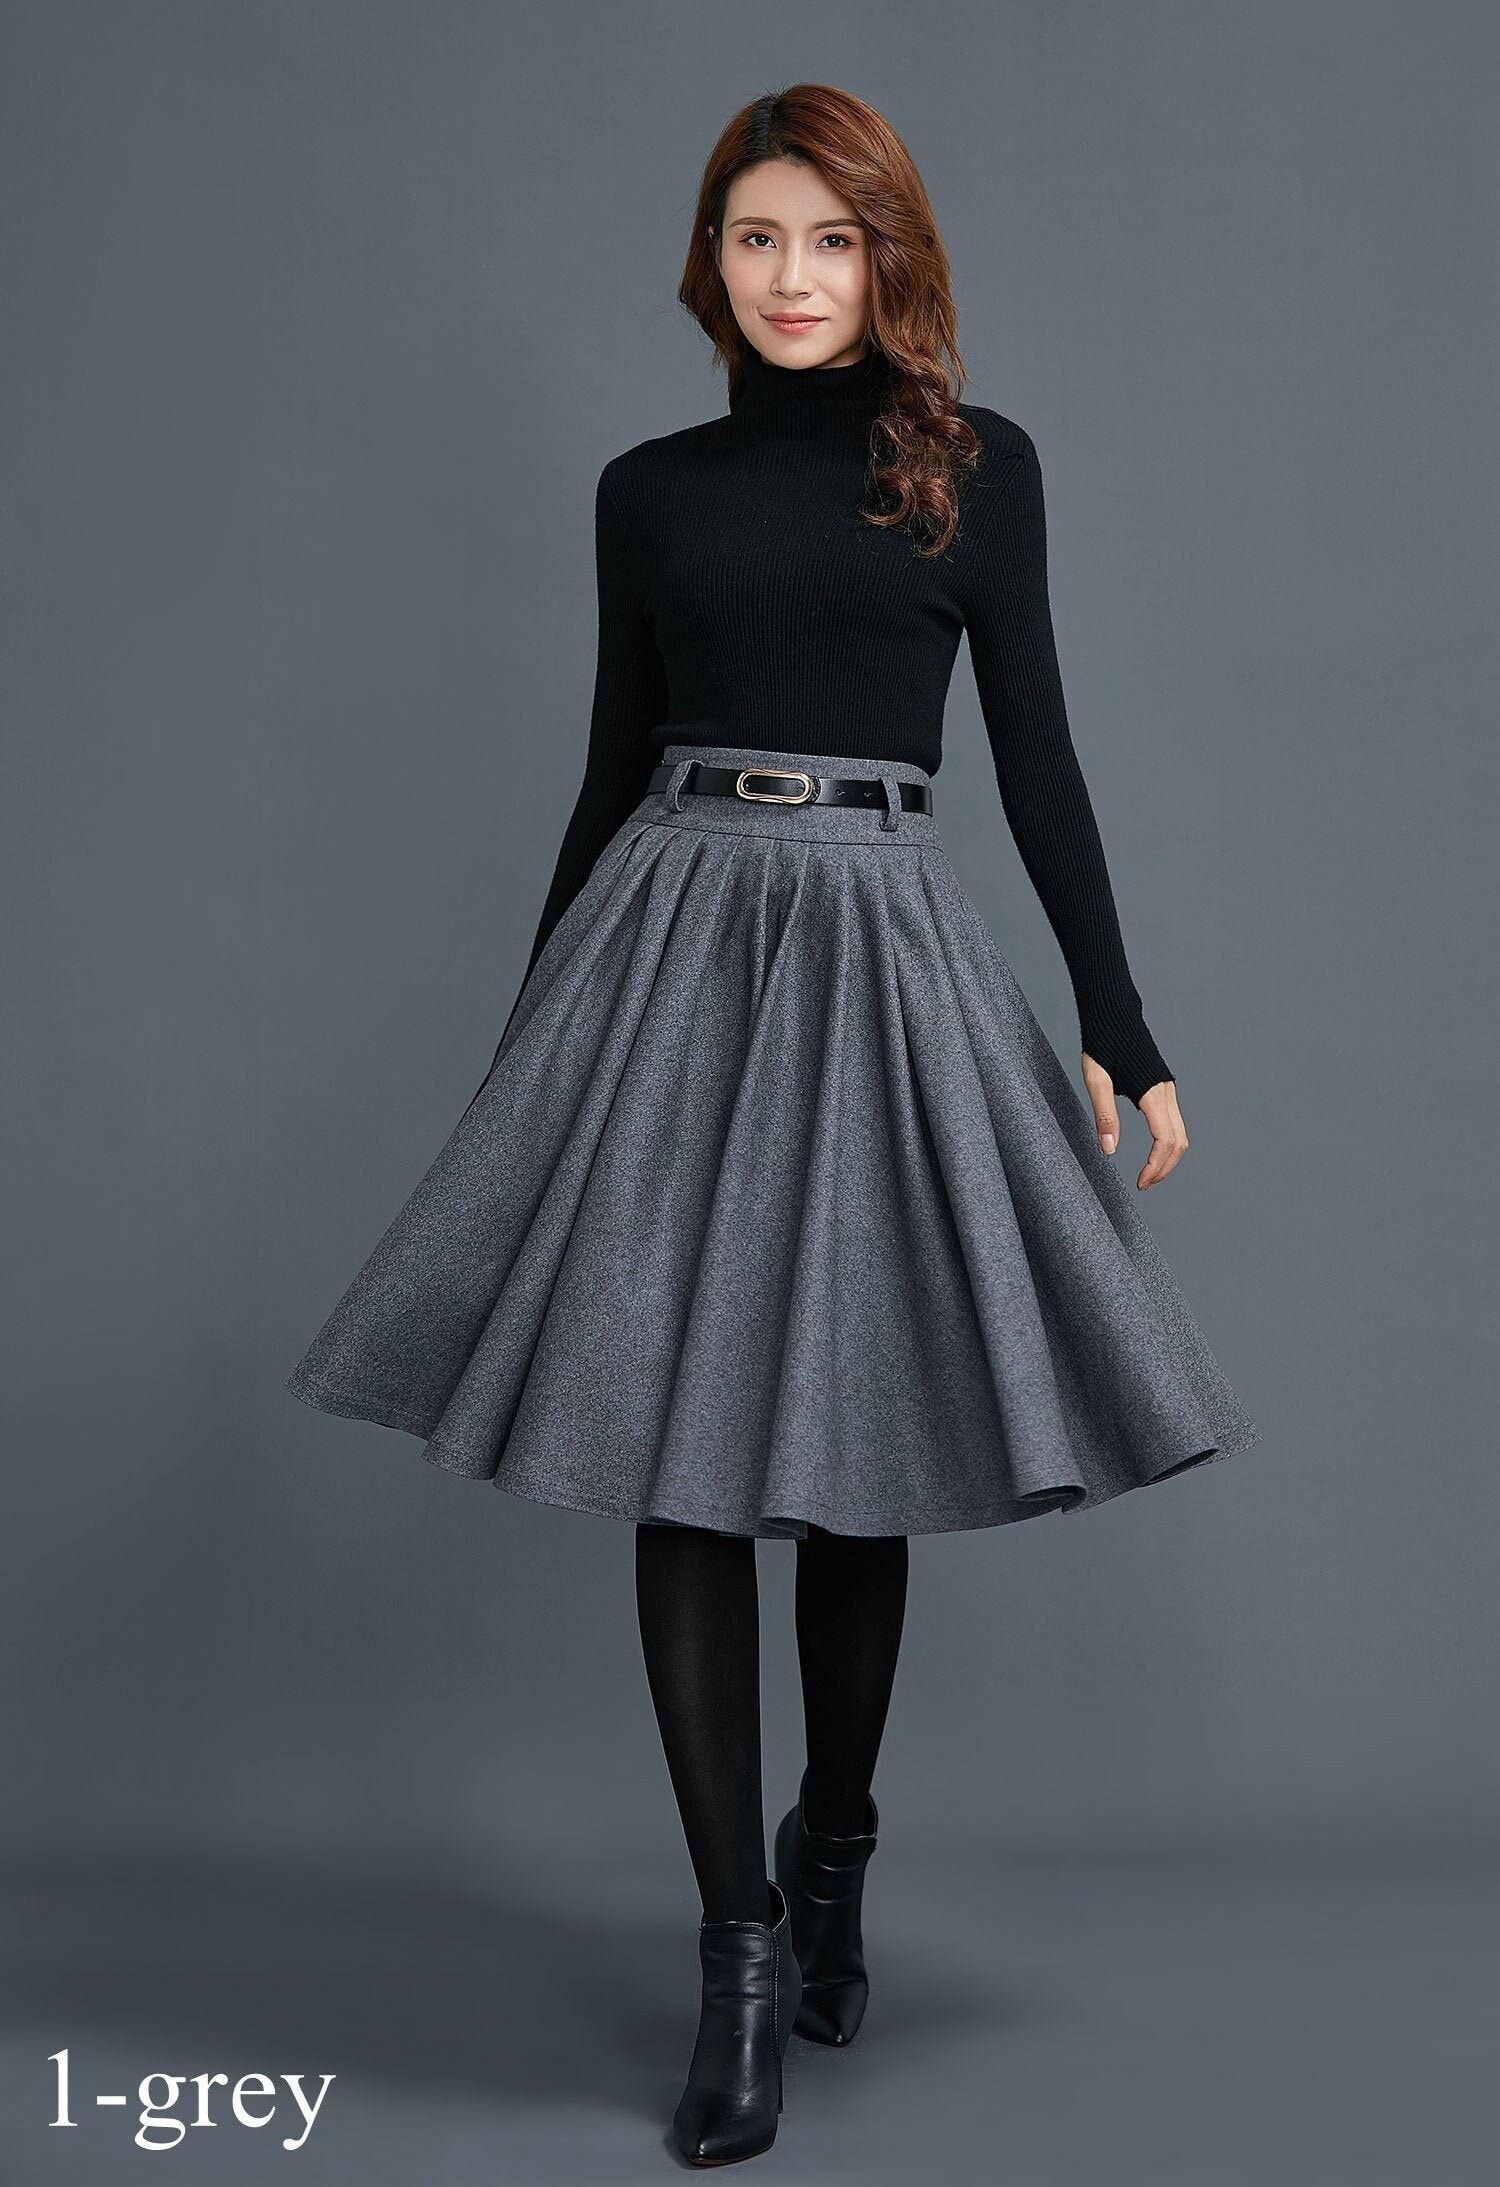 Twirl and Whirl: Embrace Movement with Circle Skirts